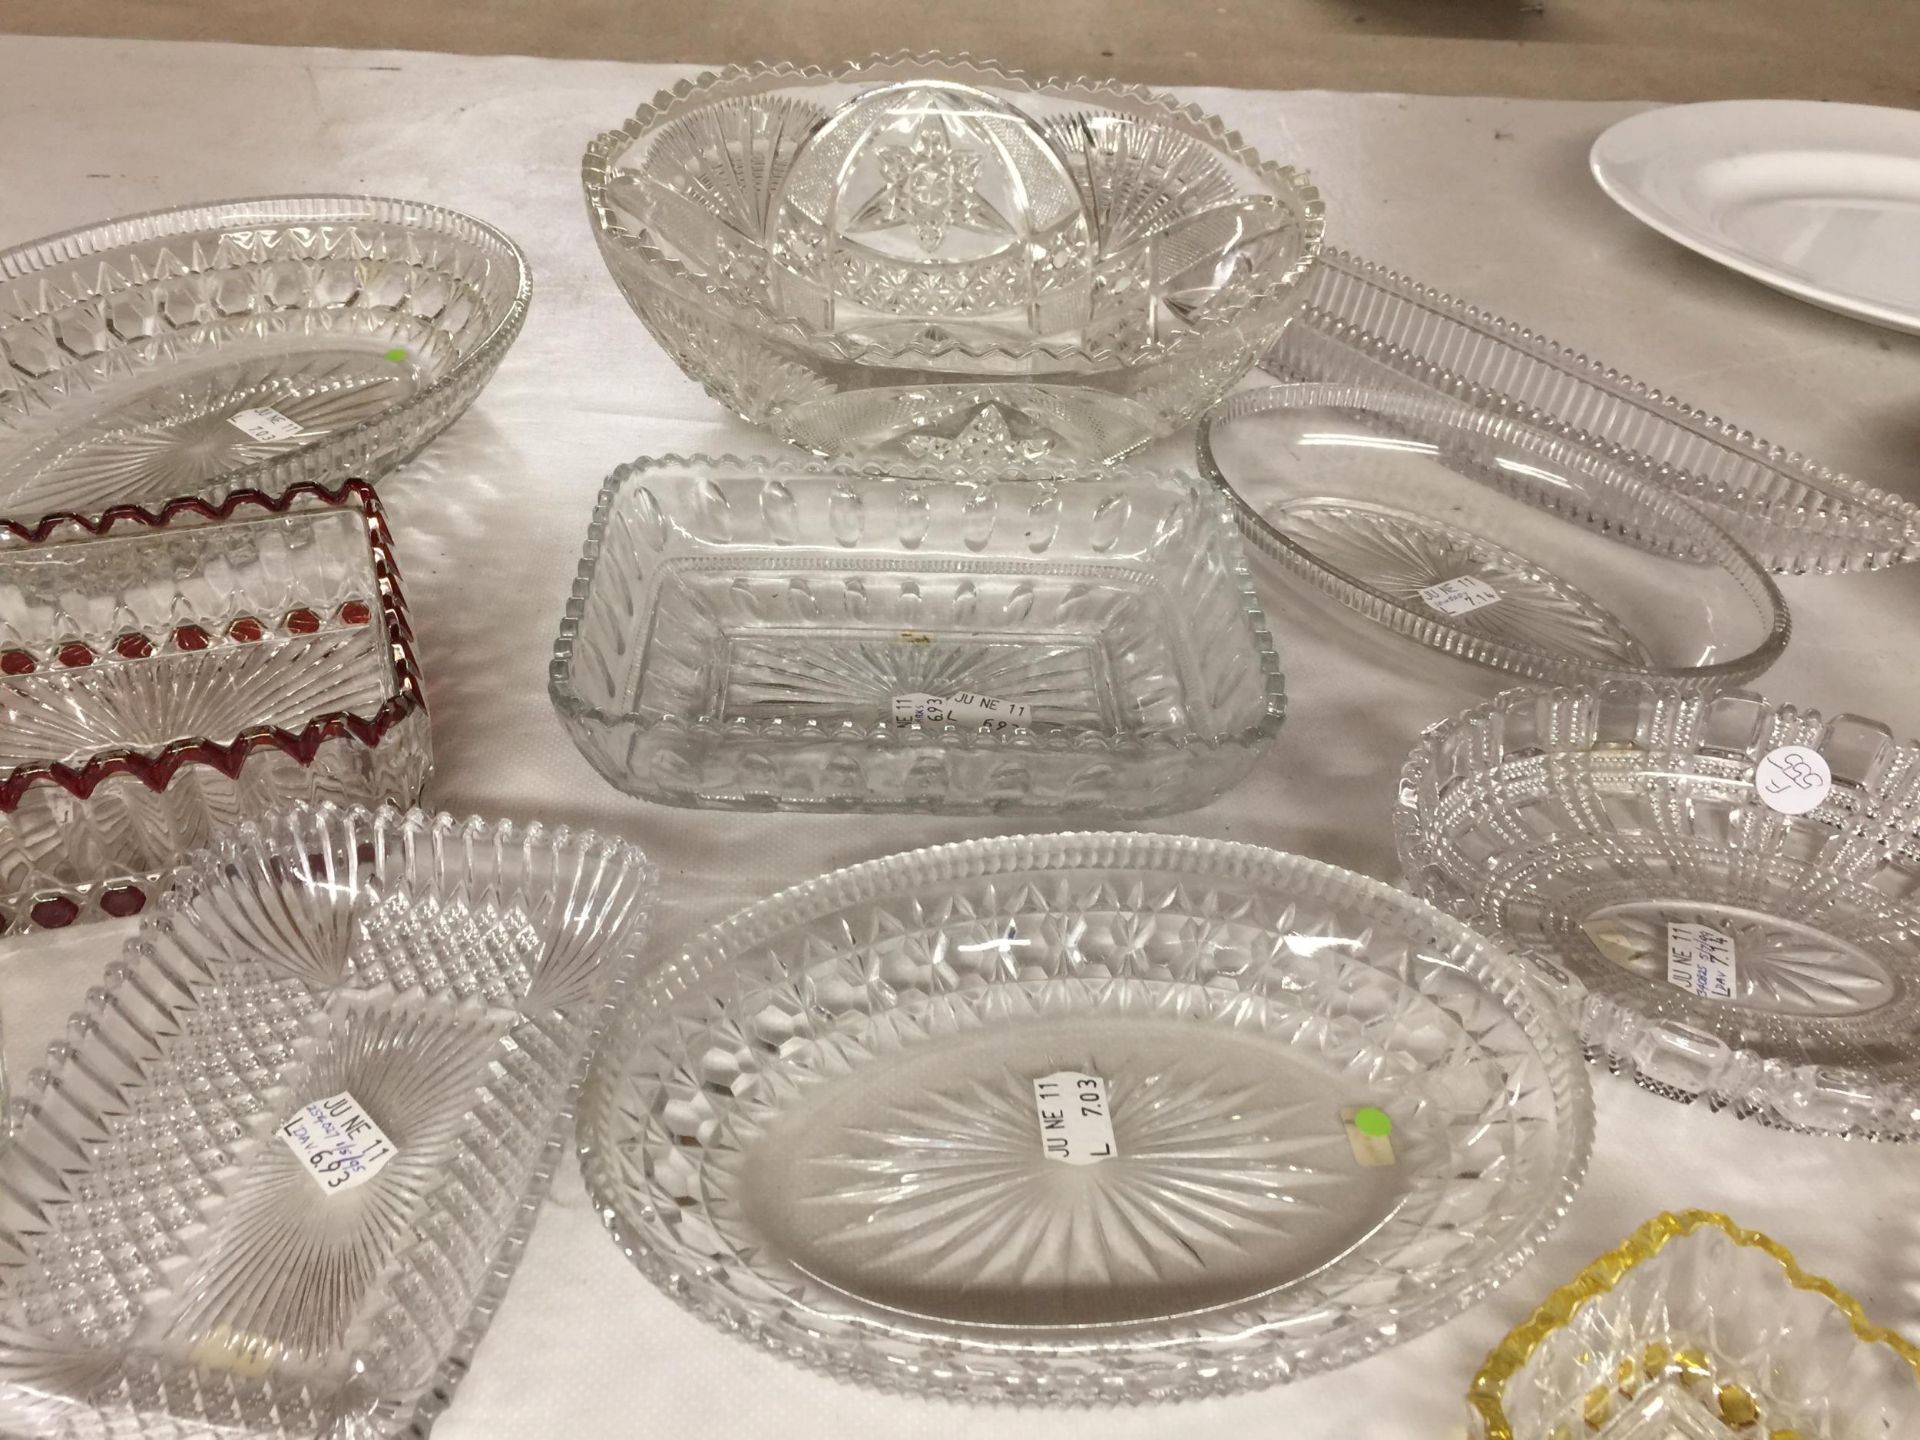 A QUANTITY OF GLASSWARE INCLUDING BOWLS, SERVING DISHES, ETC - Image 3 of 4